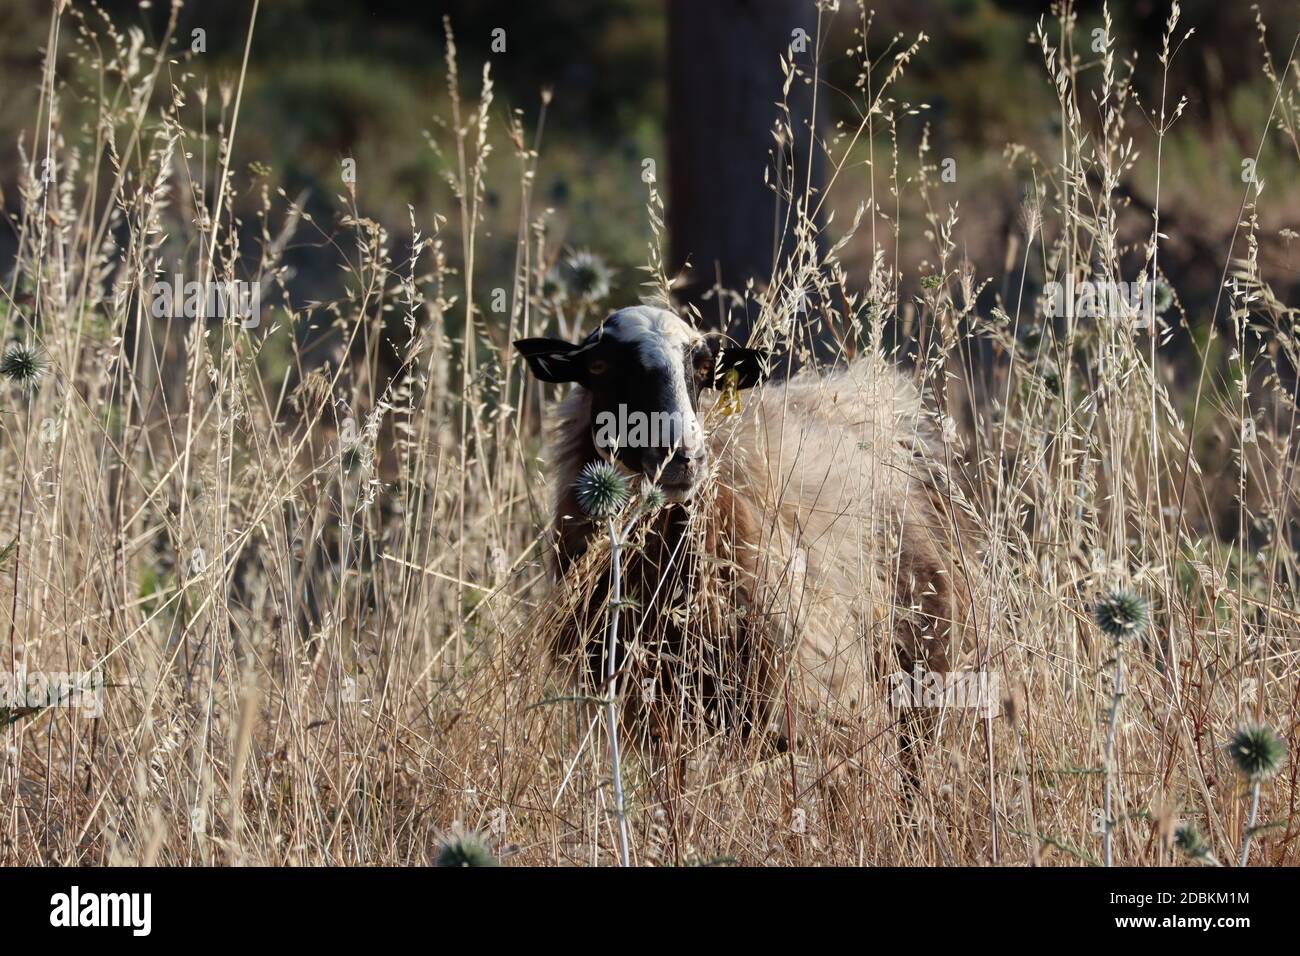 goat in the grass Stock Photo